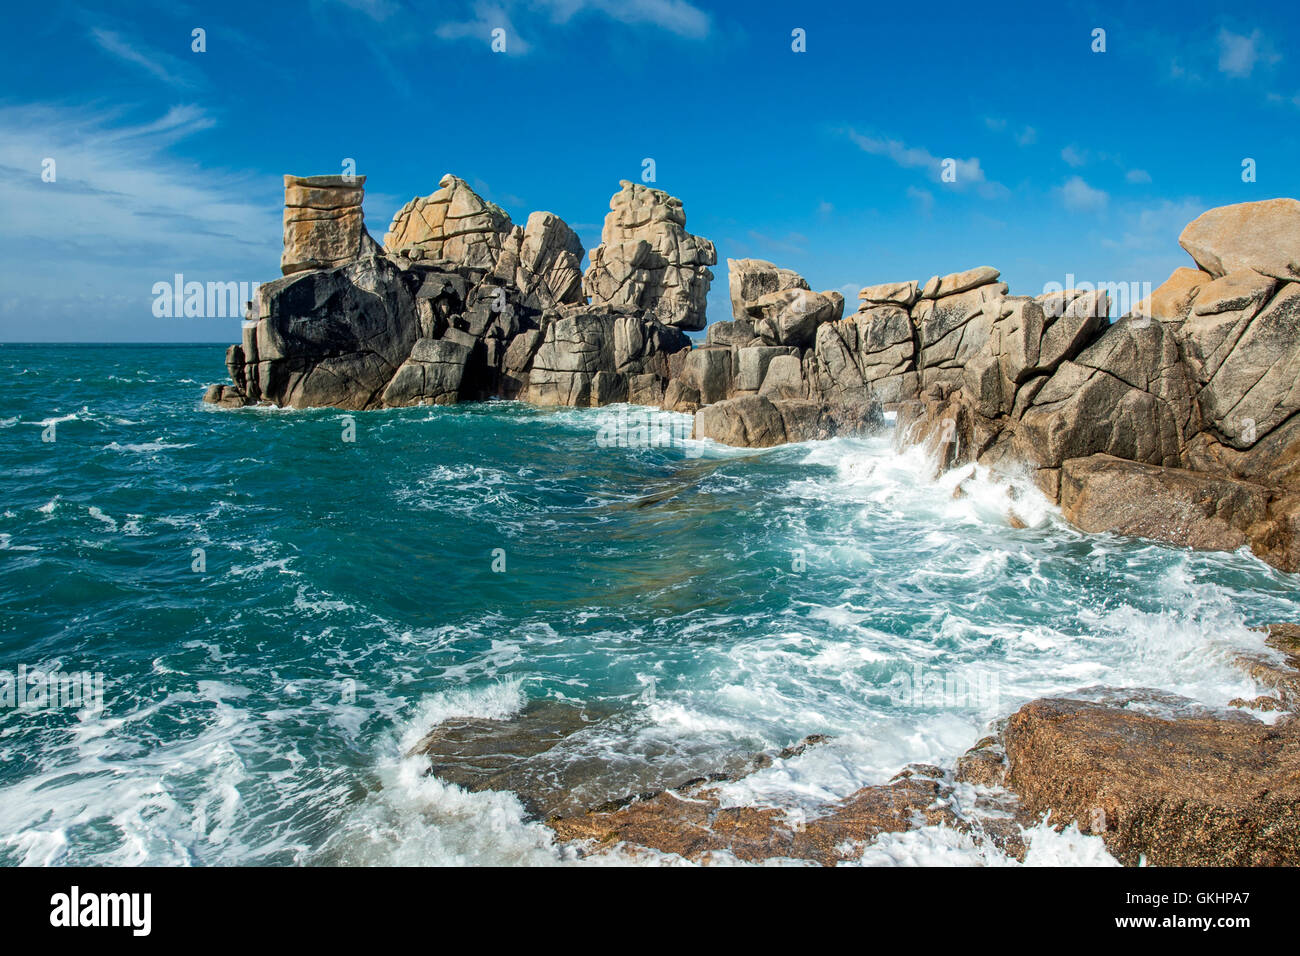 View of rocks and rough sea in morning light, Peninnis Head, St Mary's, Isles of Scilly, Cornwall, England Stock Photo